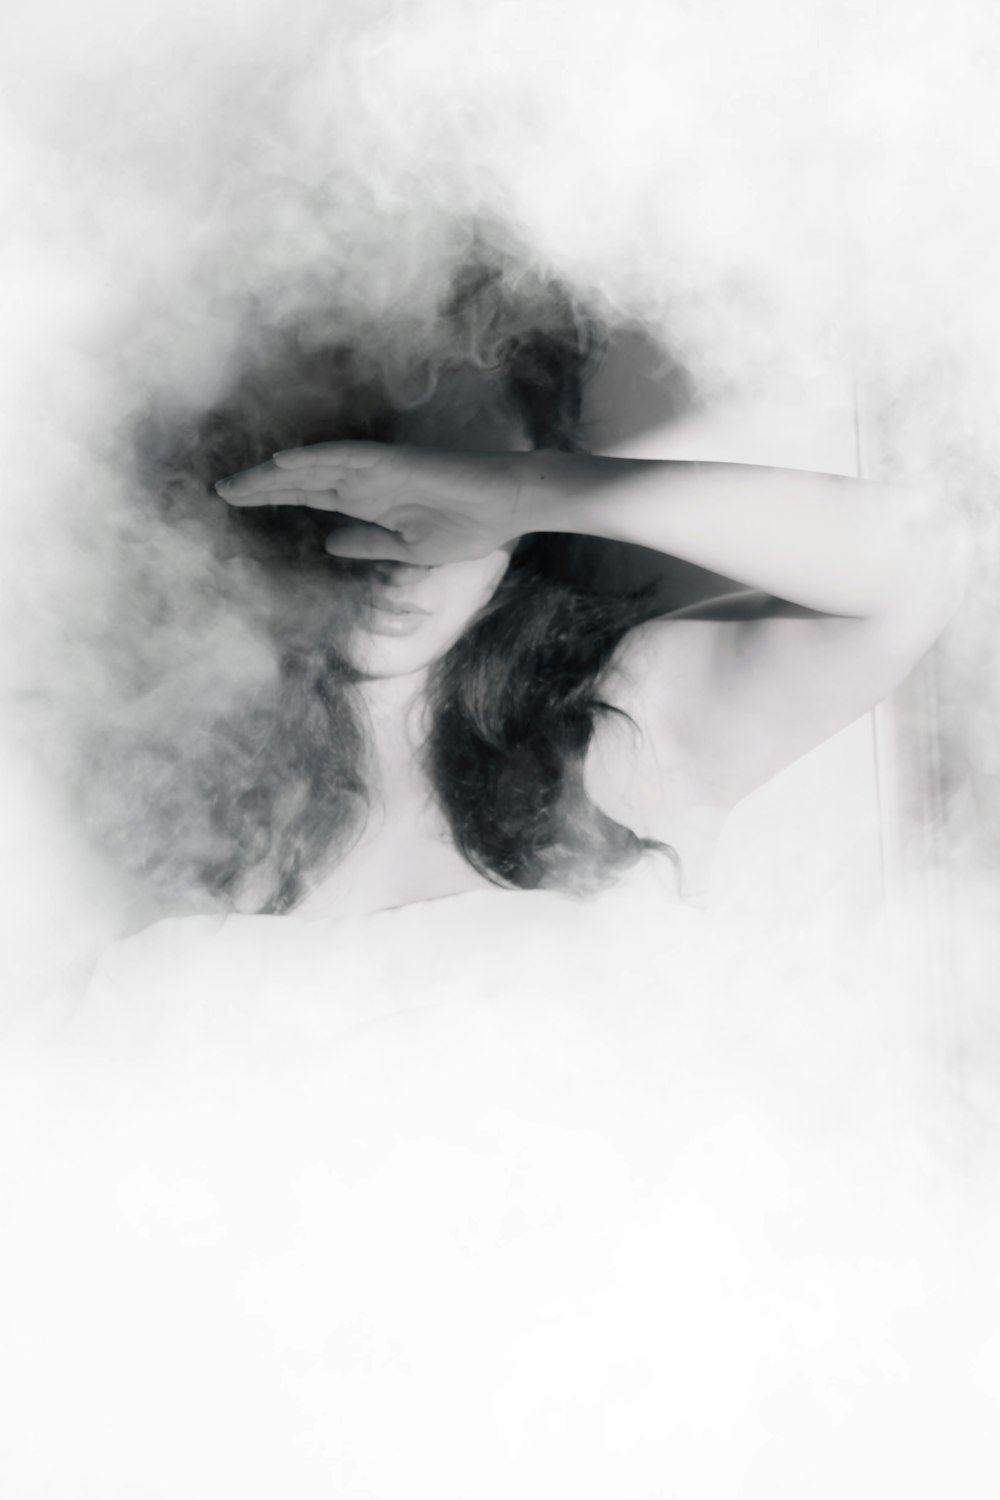 a woman with long hair standing in smoke